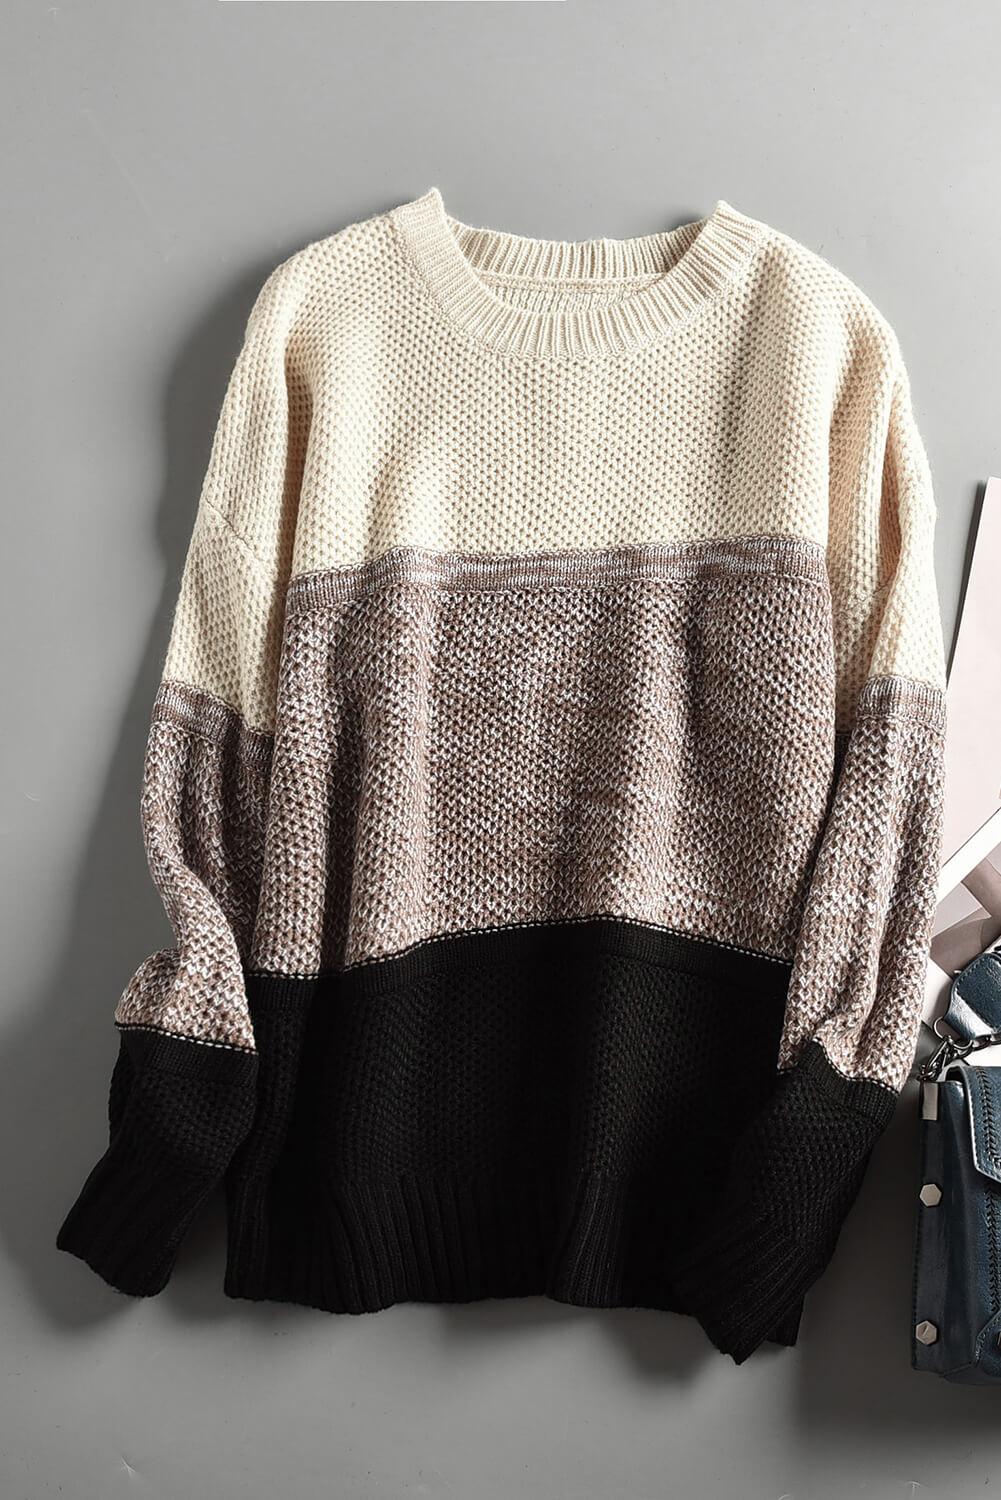 Gray Color Block Netted Texture Pullover Sweater - L & M Kee, LLC